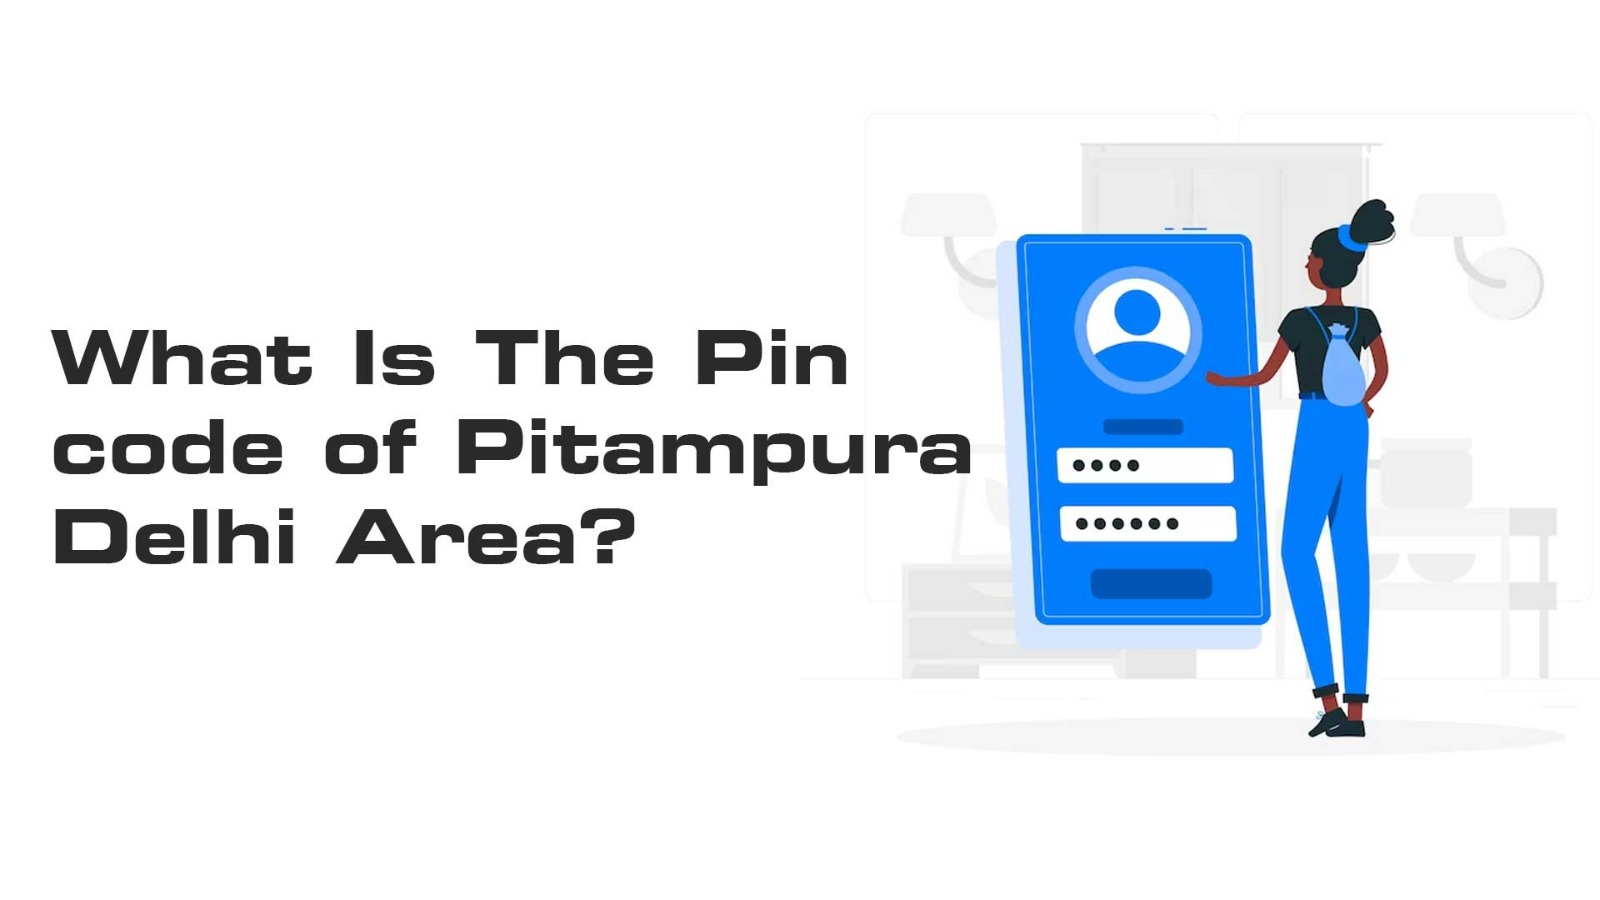 What Is The Pin code of Pitampura Delhi area?